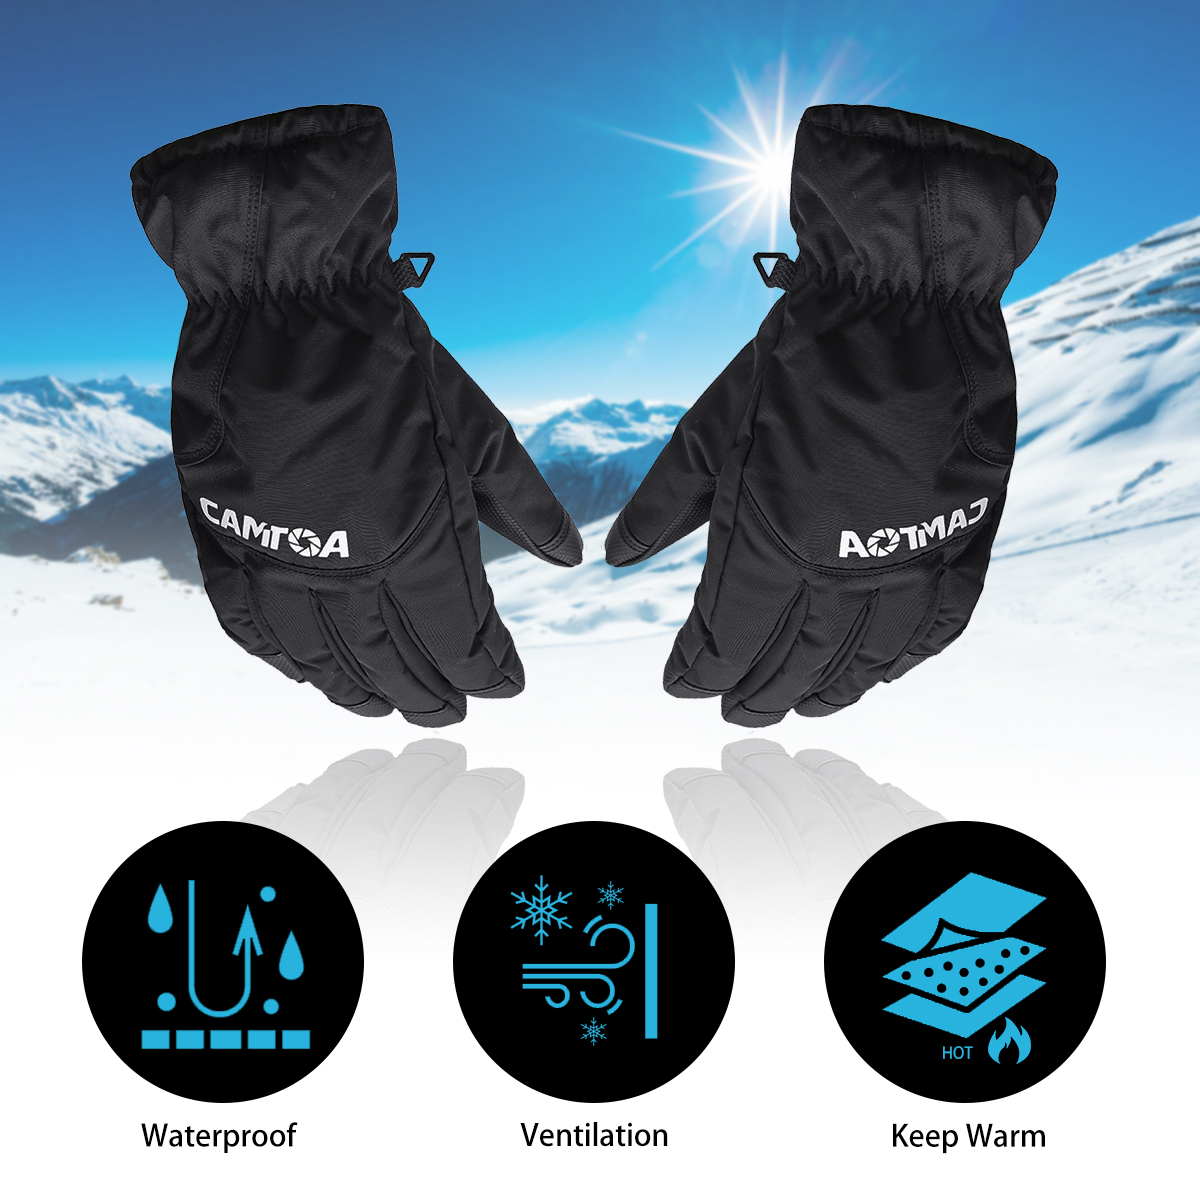 CAMTOA-Winter-Ski-Gloves-3M-Thinsulate-Warm-Waterproof-Breathable-Snow-Gloves-for-Men-and-Women-1397724